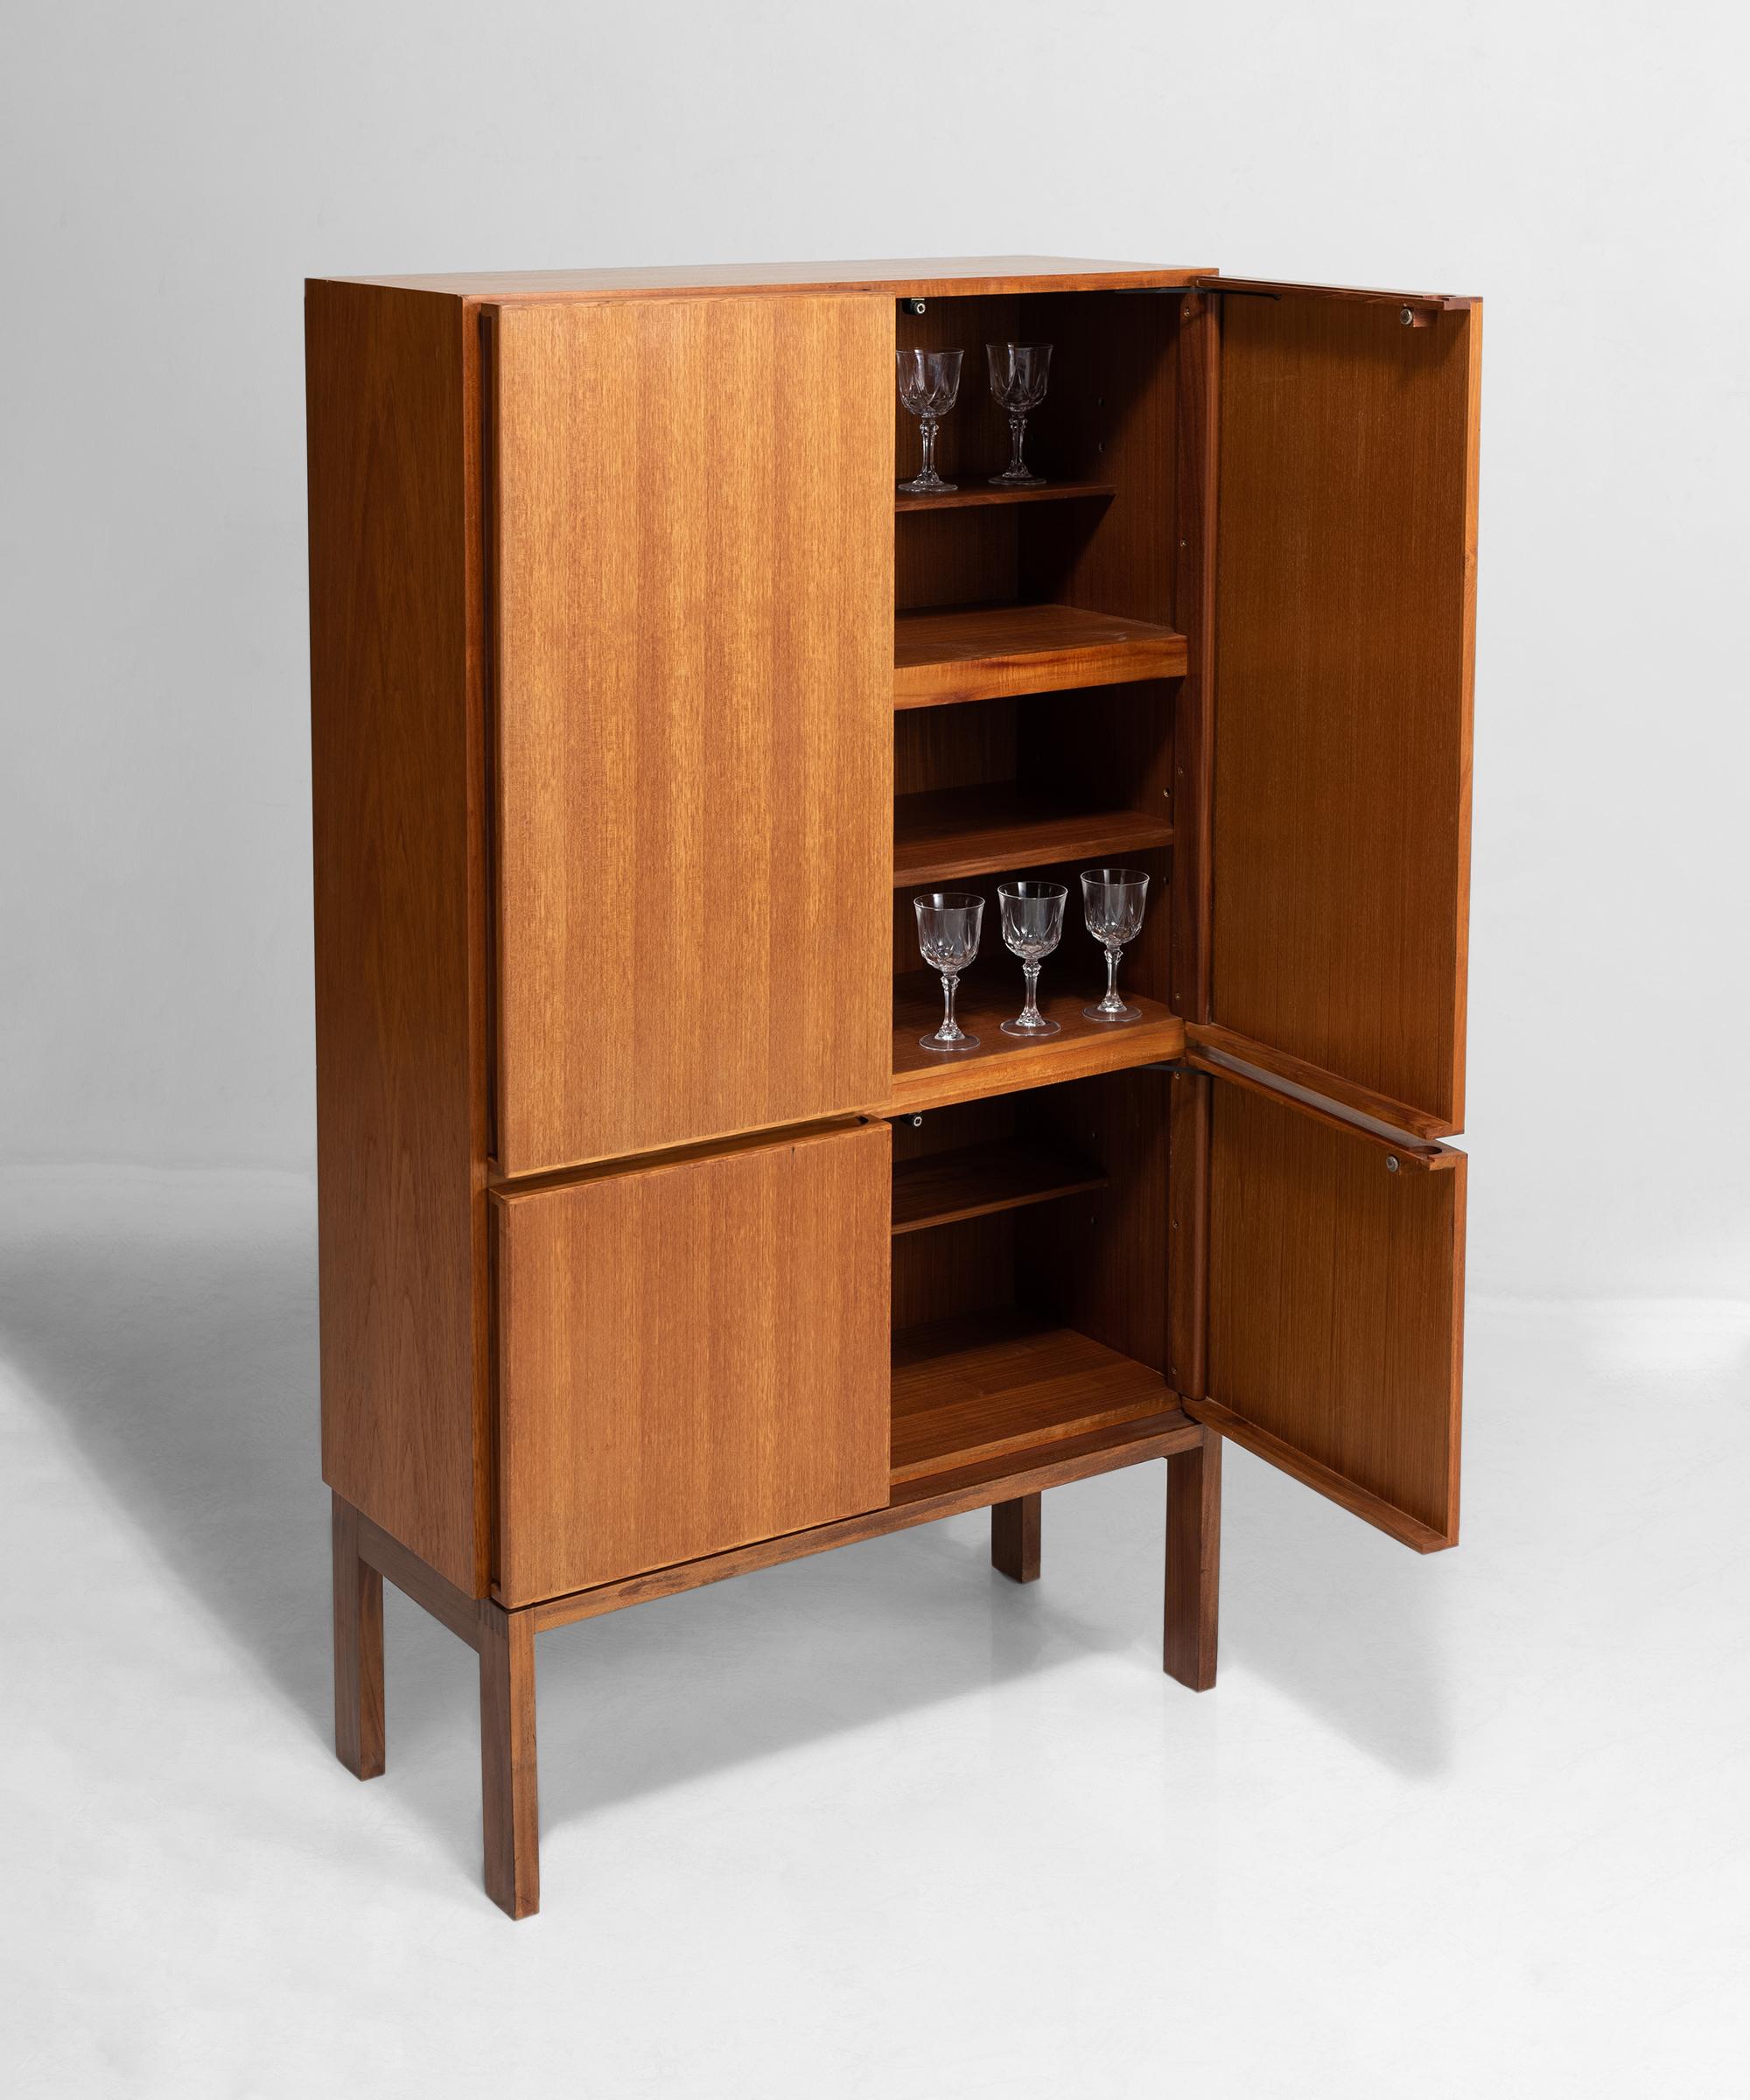 English Solid Teak Cabinet by Robert Heritage for Gordon Russell